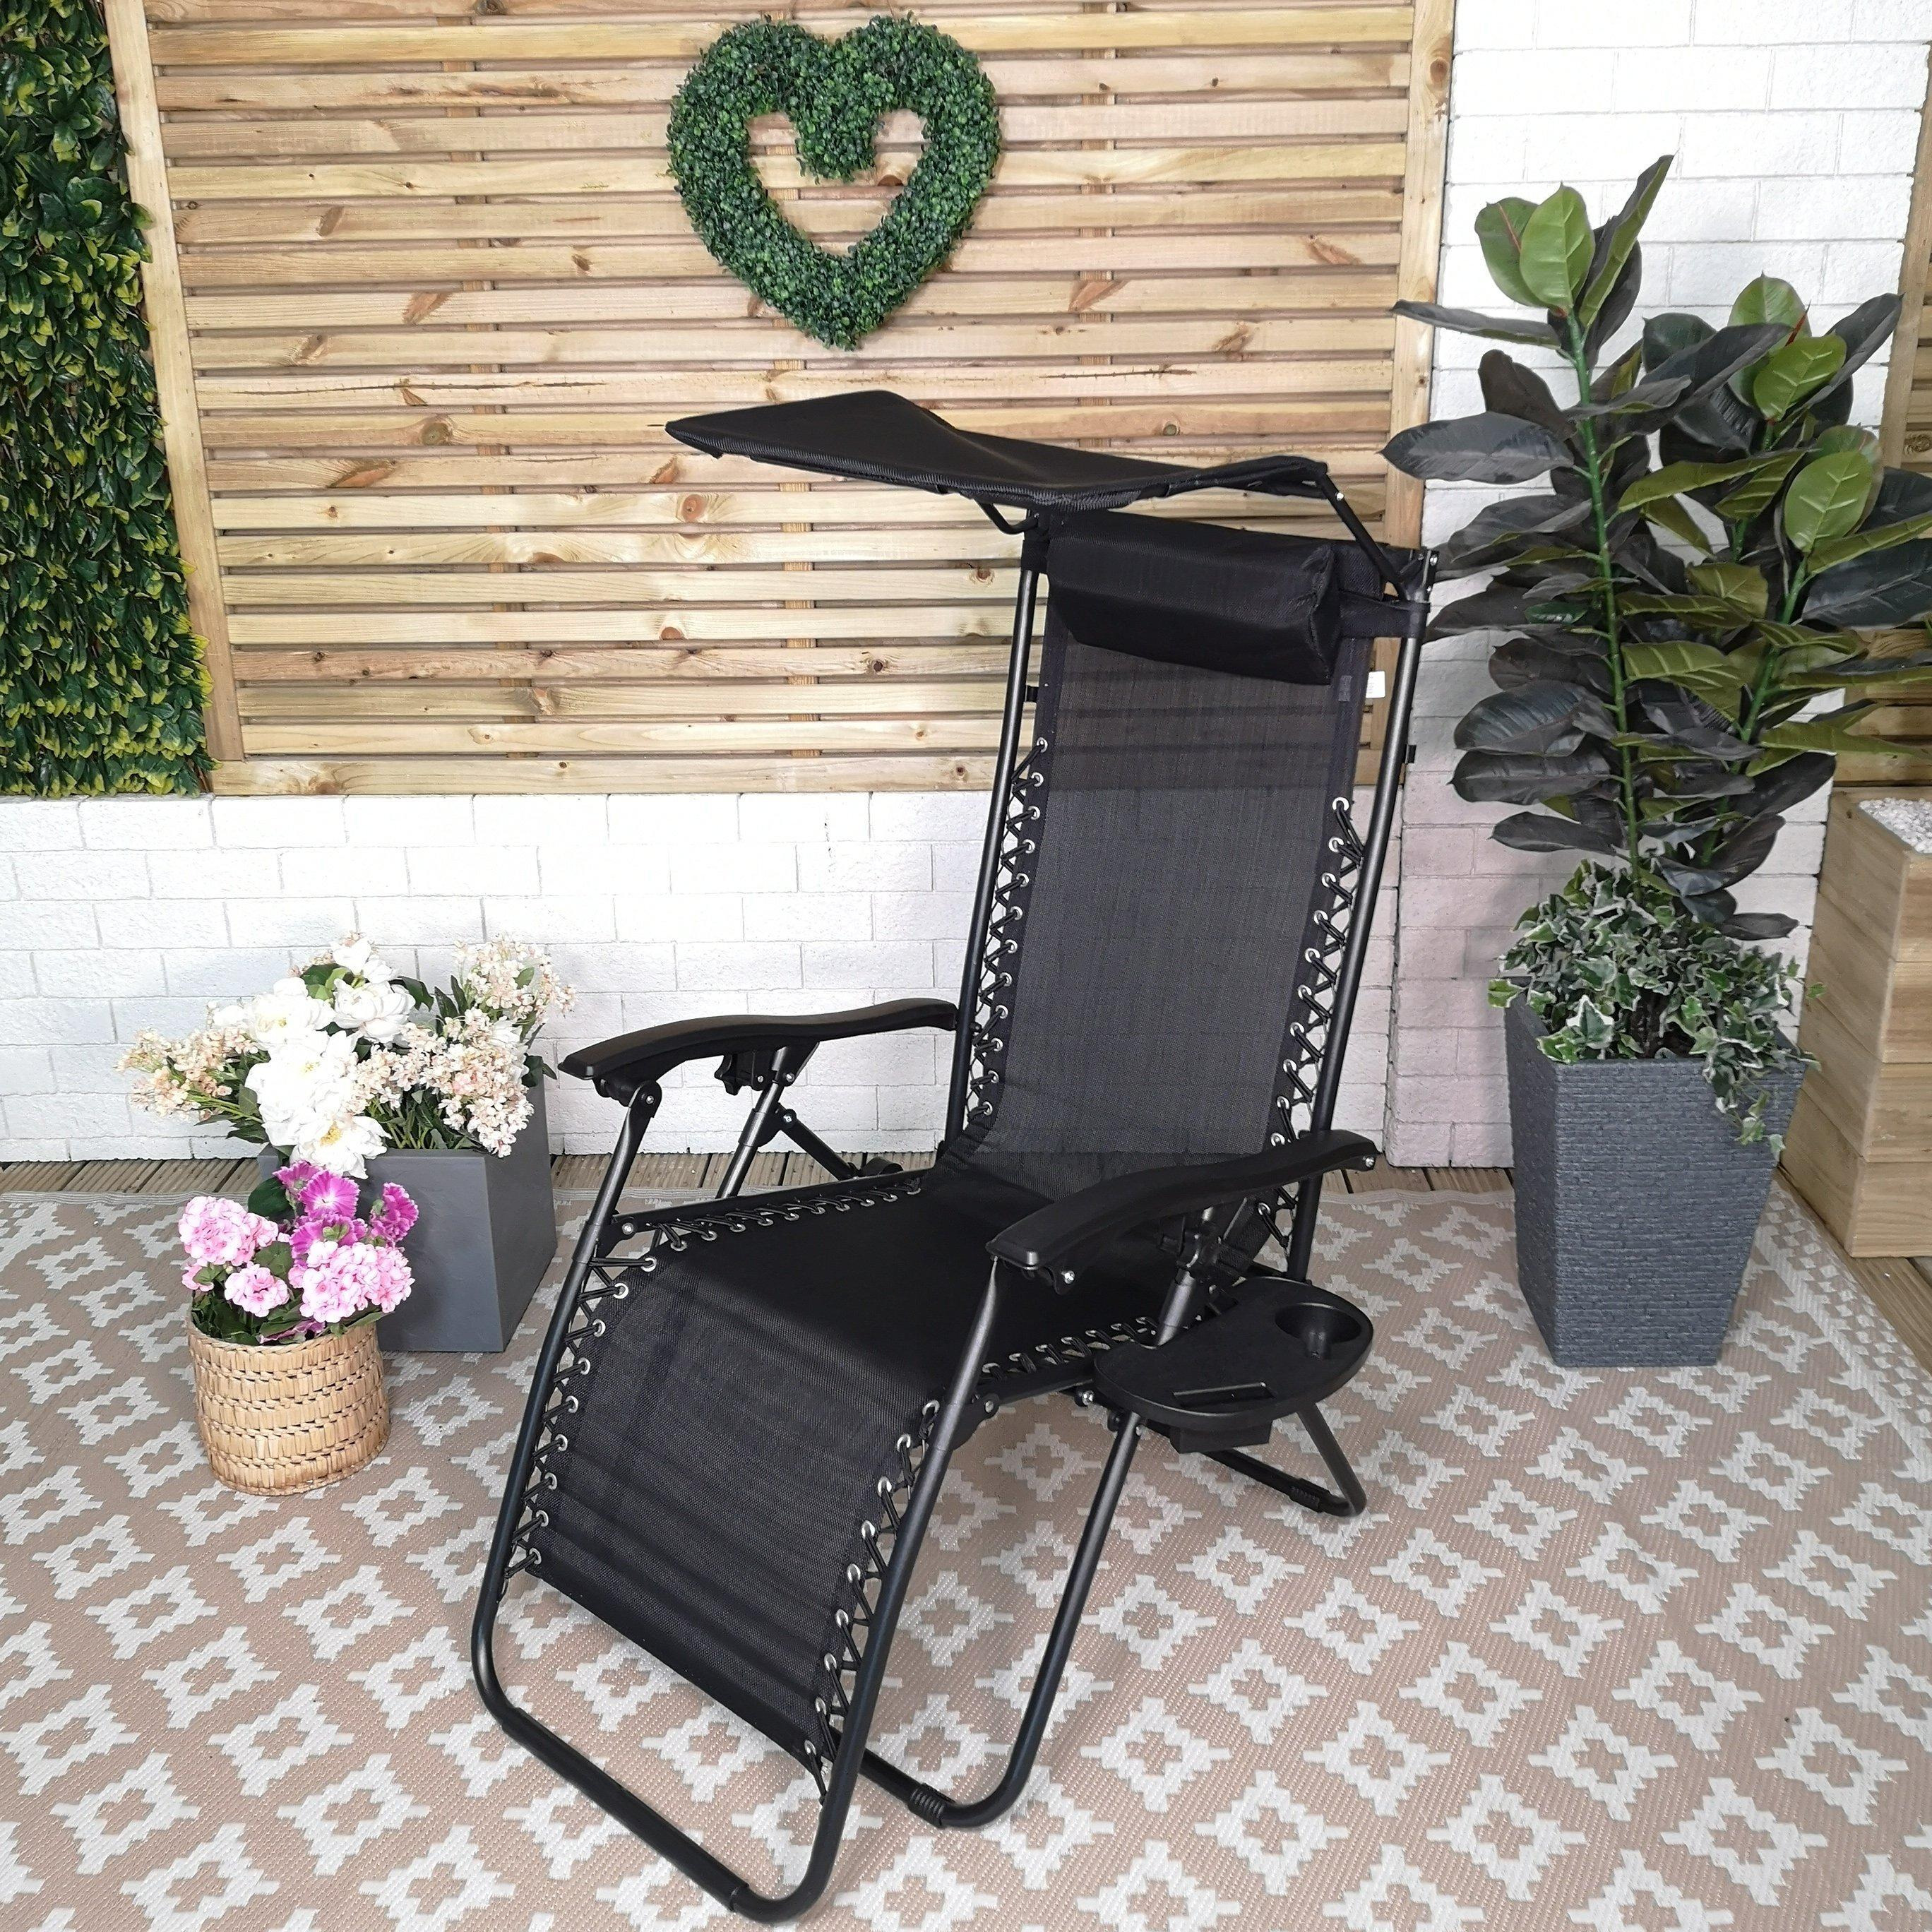 Multi Position Garden Gravity Relaxer Chair Sun Lounger with Sun Canopy in Black - image 1